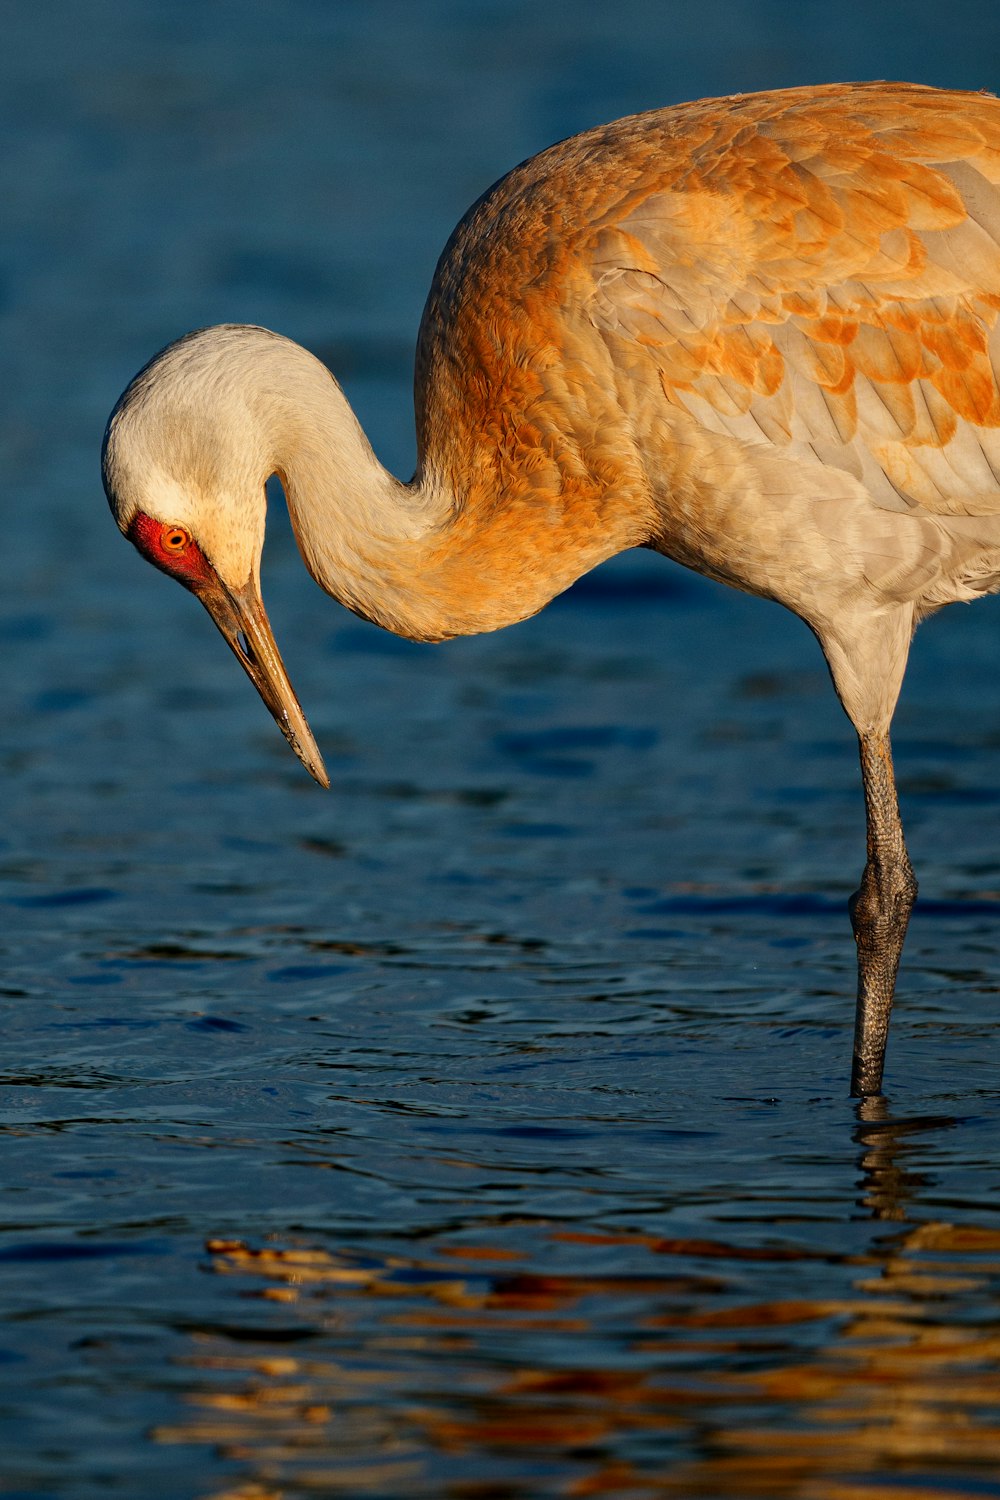 a large bird with a long neck standing in the water